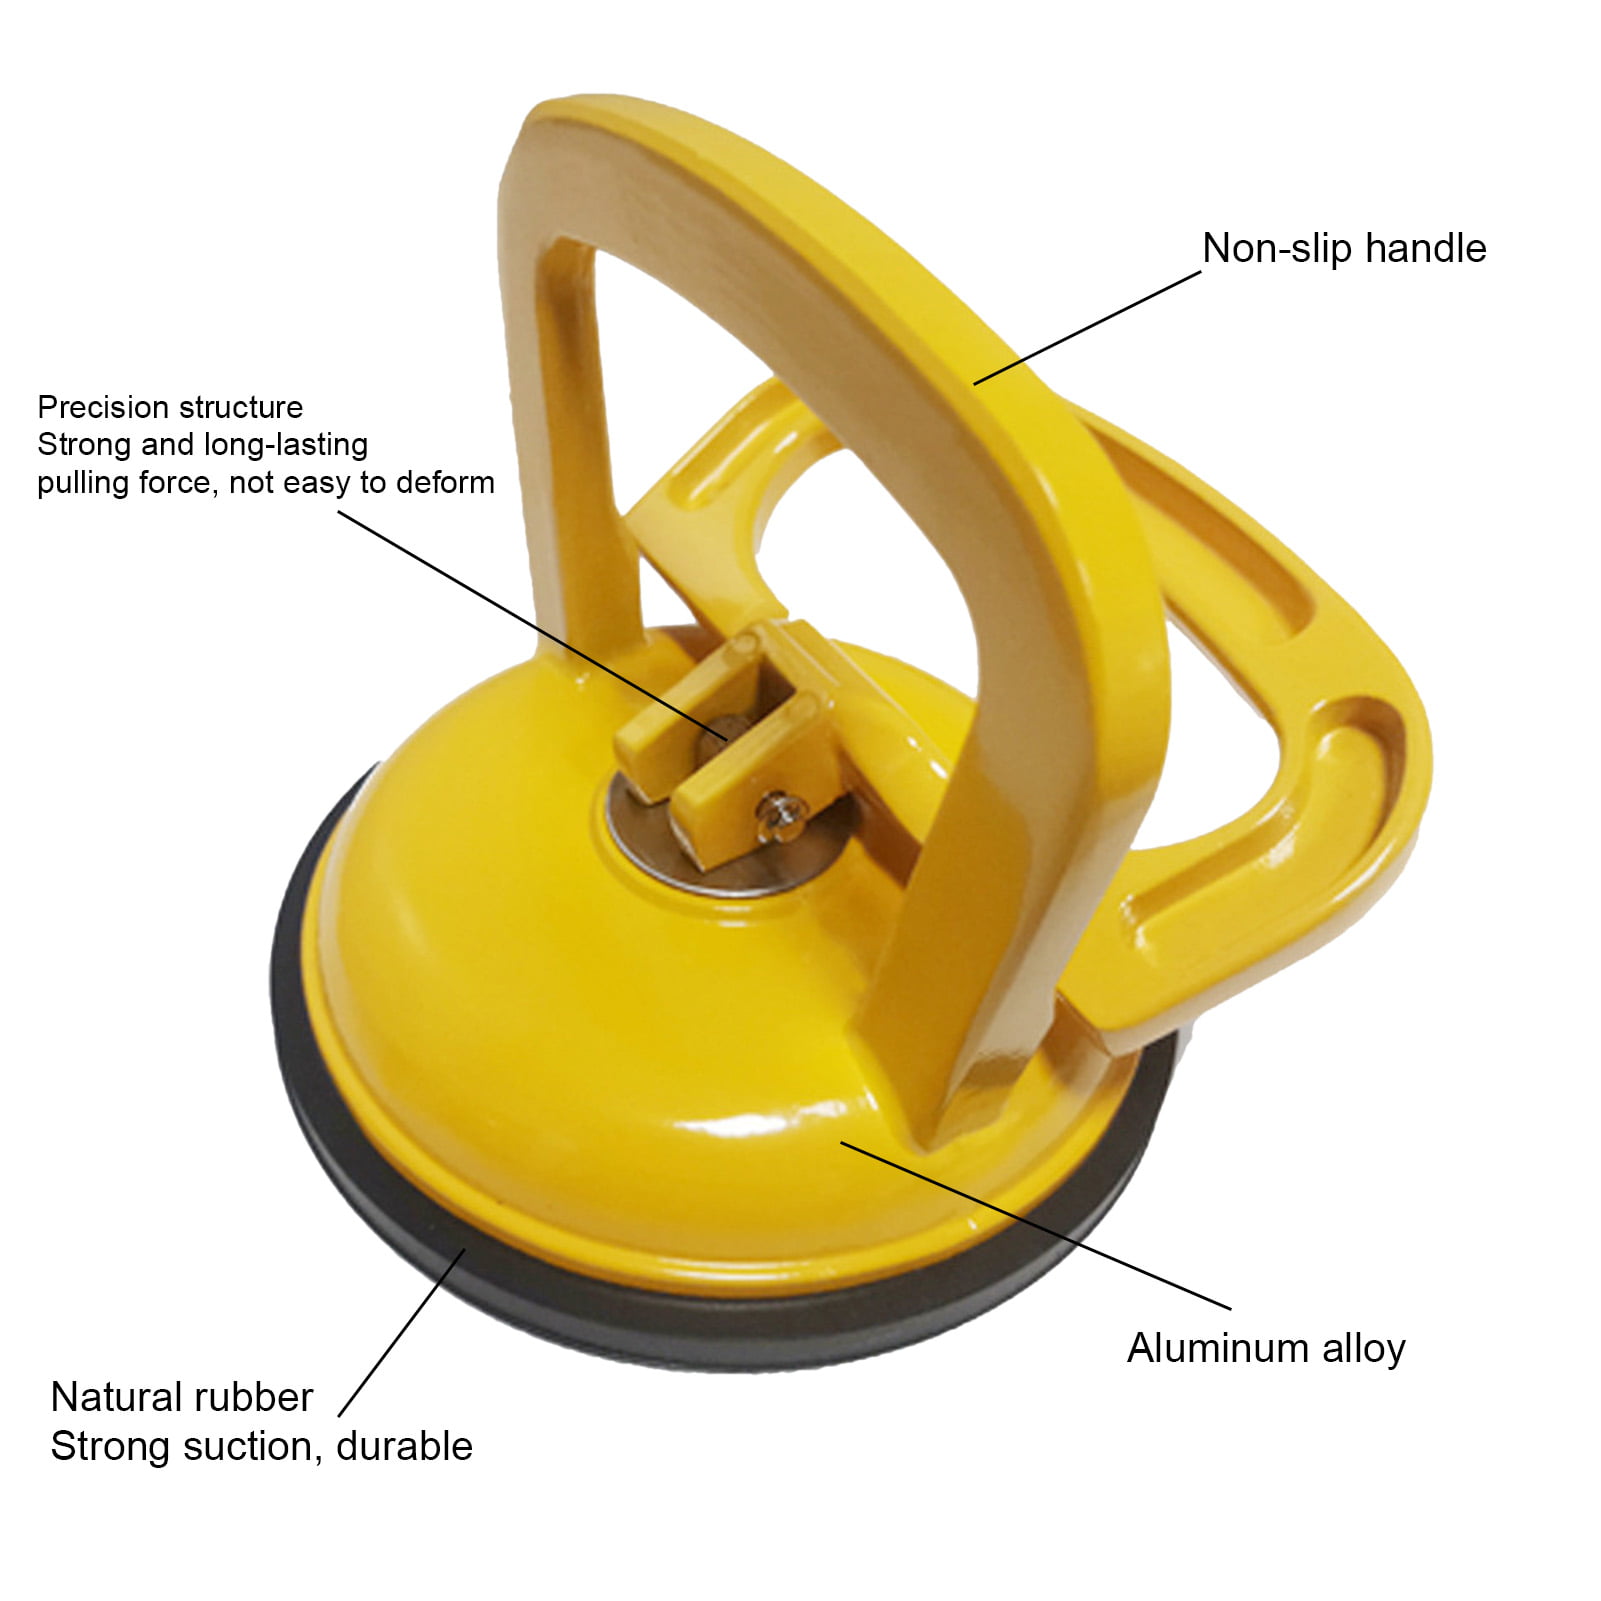 SPARE LEVER FOR Suction Cup Glass Lifter Sucker Pad Carrying Grabbing Puller